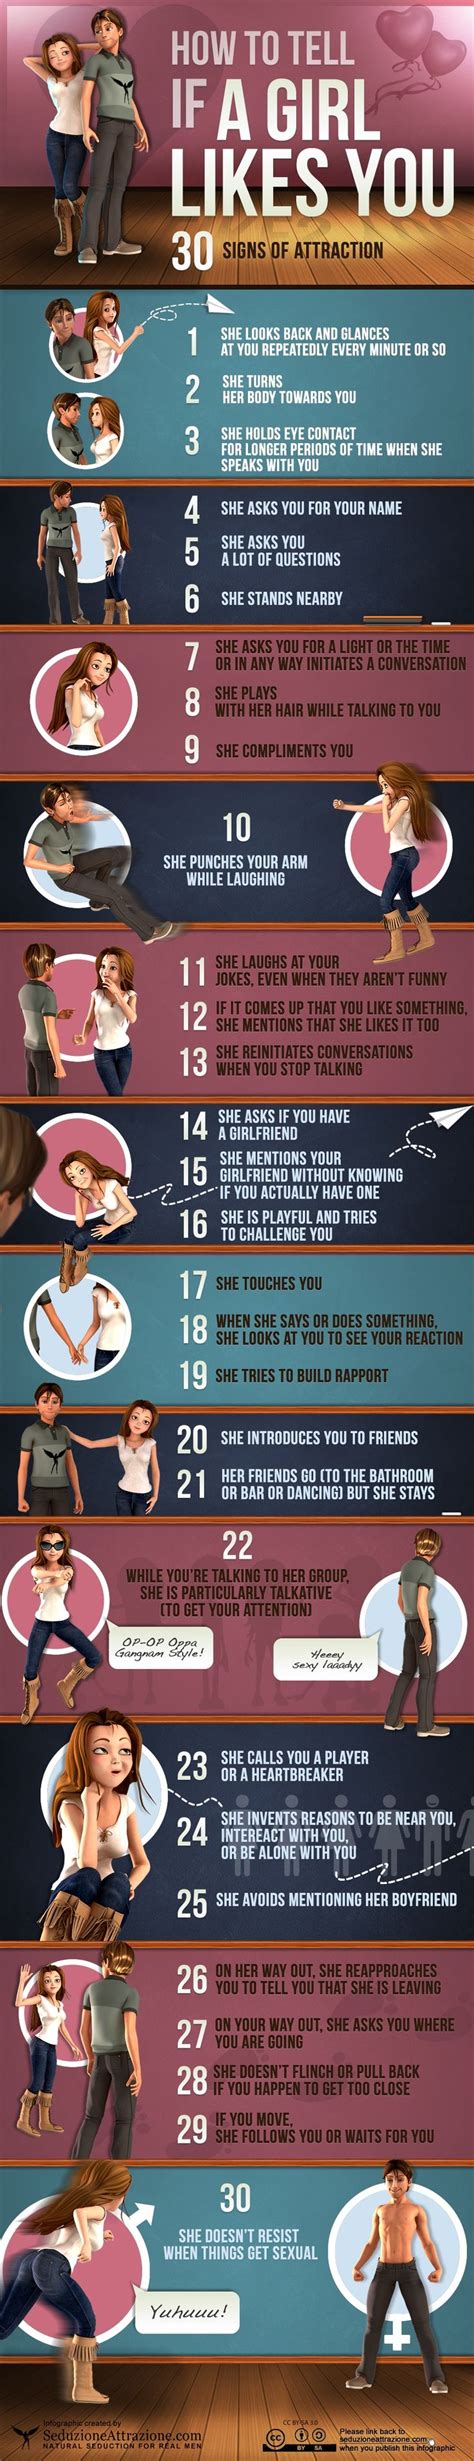 How Can You Tell If A Girl Likes You Or Not You Need To Look For These 30 Signs Of A Body